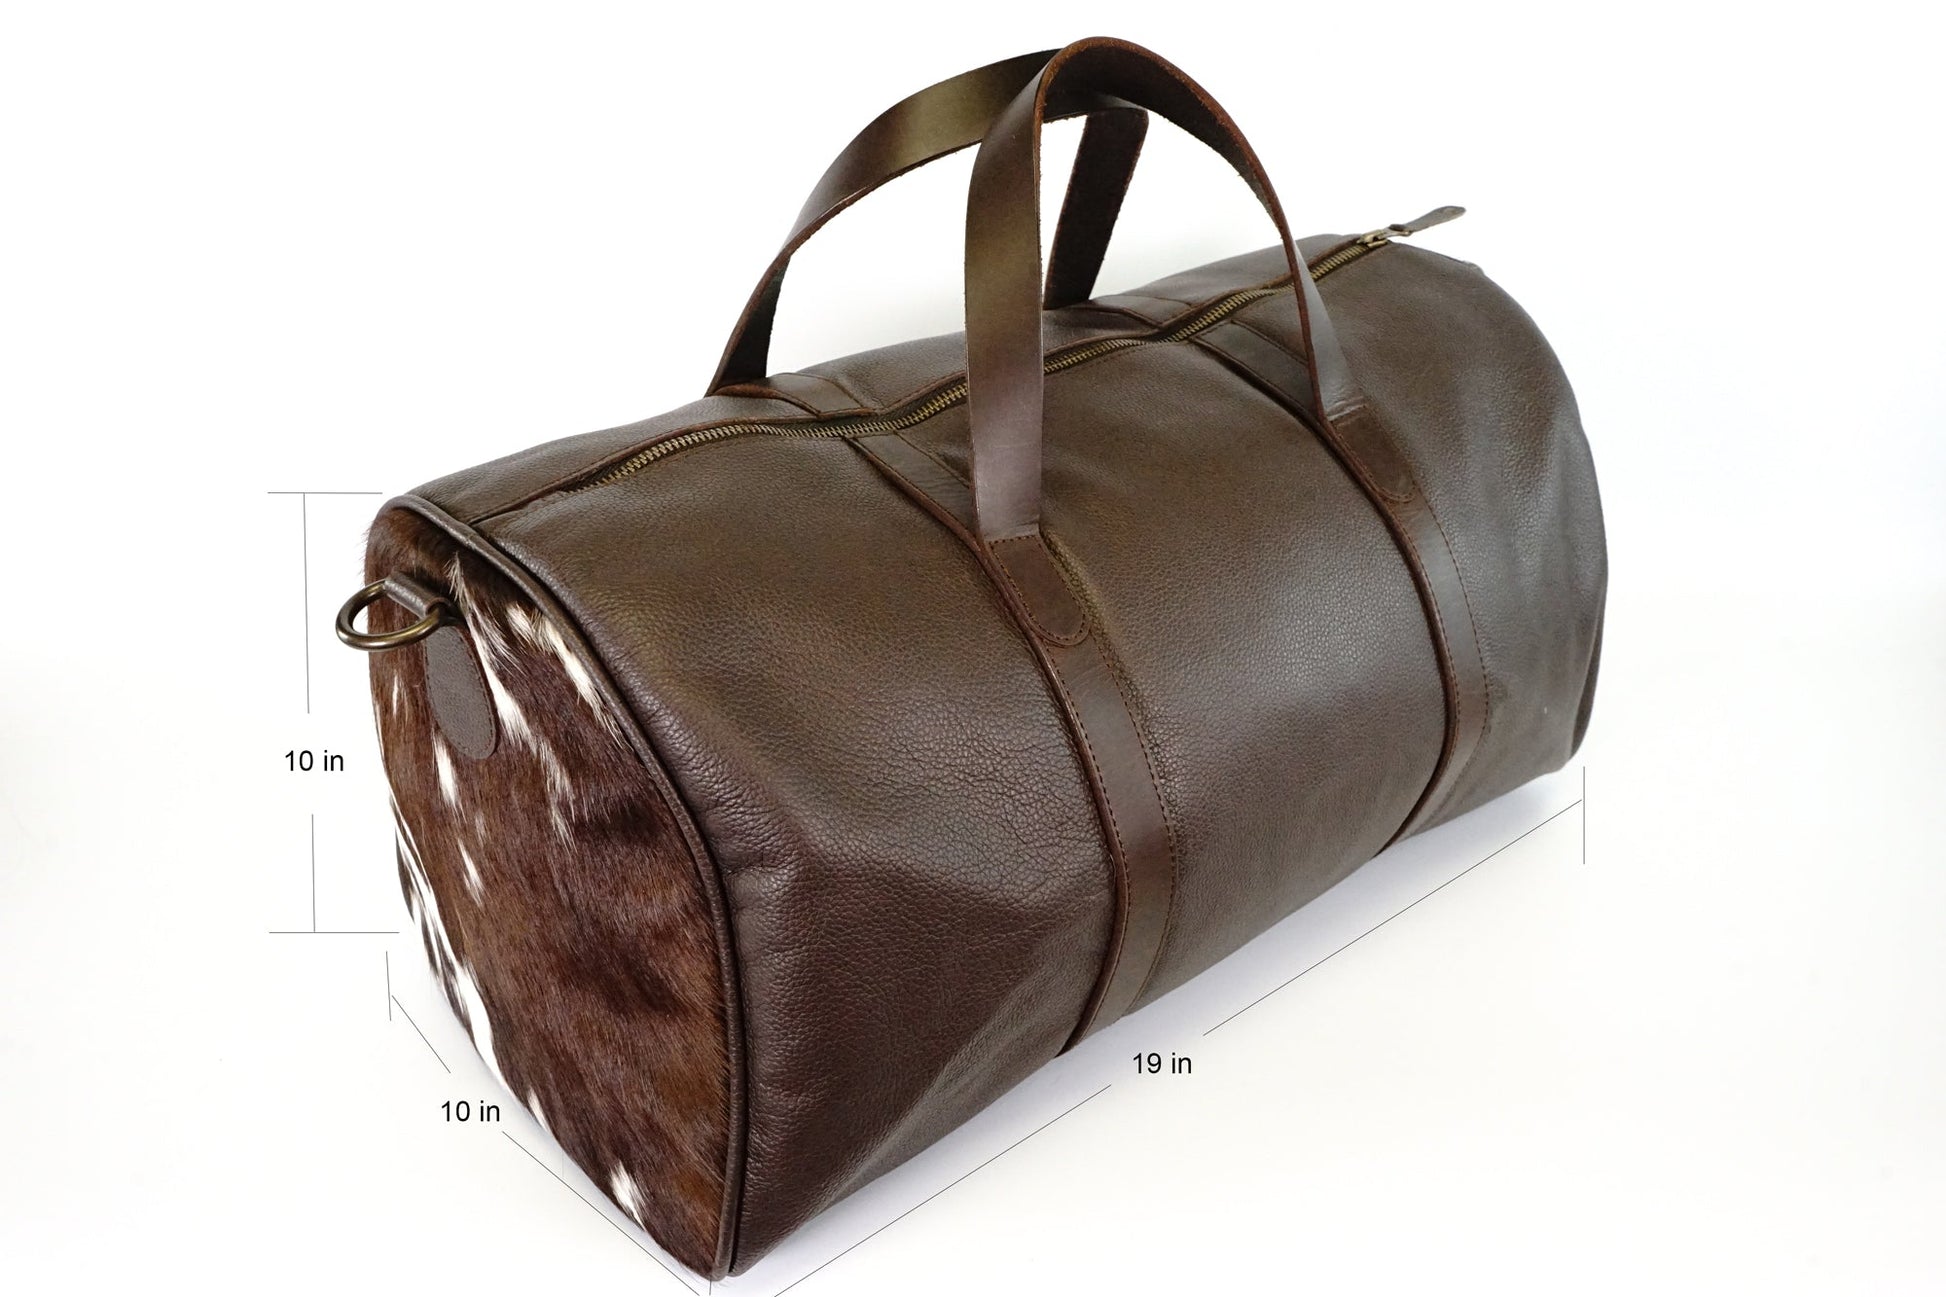 RODEO Daily Duffel cowhide leather Bag - Rodeo Cowhide RugsBlack